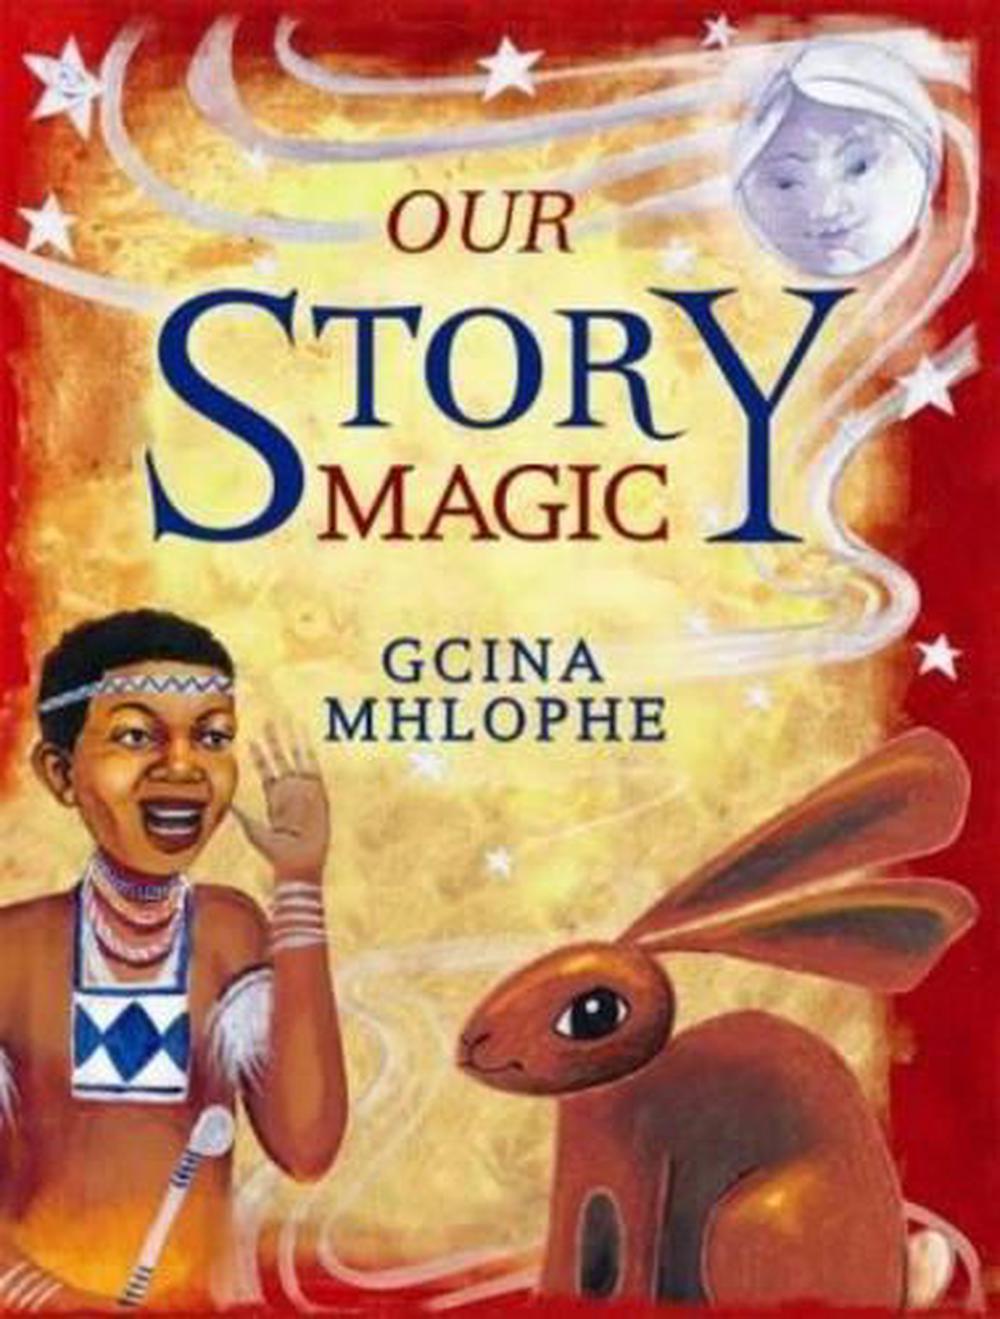 Our Story Magic By Gcina Mhlophe English Hardcover Book Free Shipping Ebay